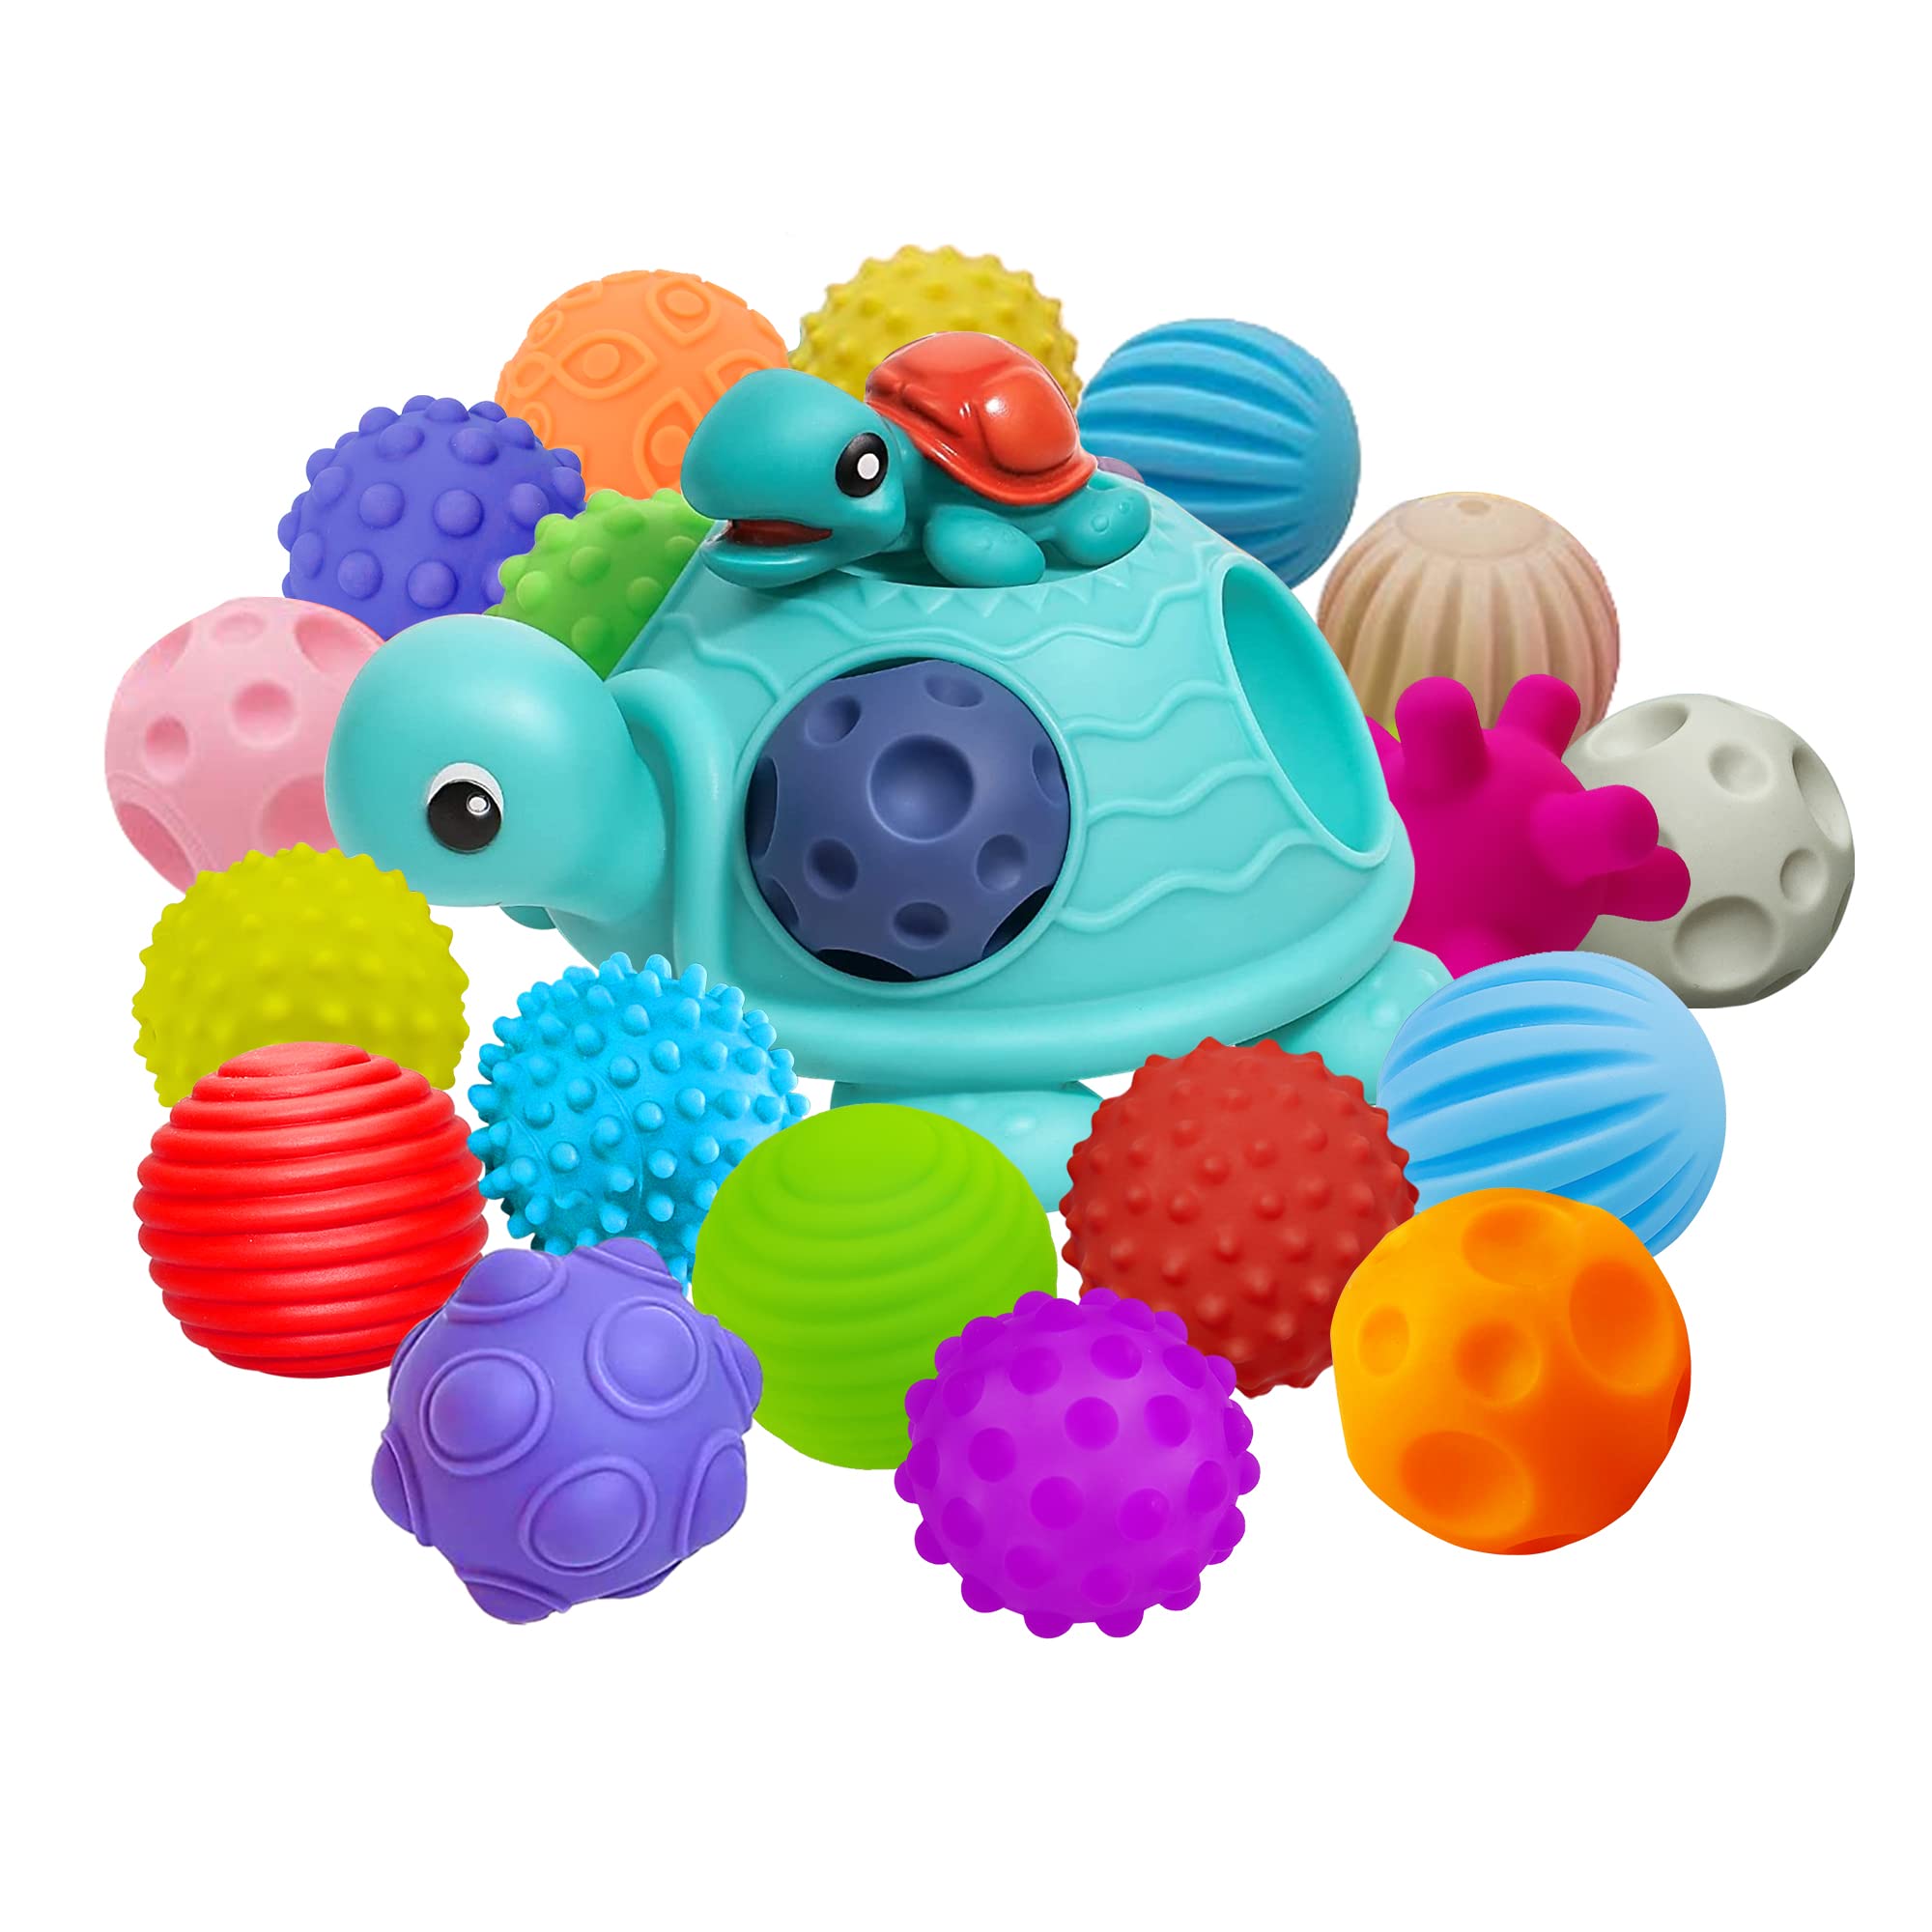 ROHSCE Sensory Balls for Baby Sensory Baby Toys 6 to 12 Months for Toddlers 1-3, Sensory Turtle Toy with Sensory Balls, Montessori Toys for Babies 6-12 Months Infant 0-6 Months (12 Pack)